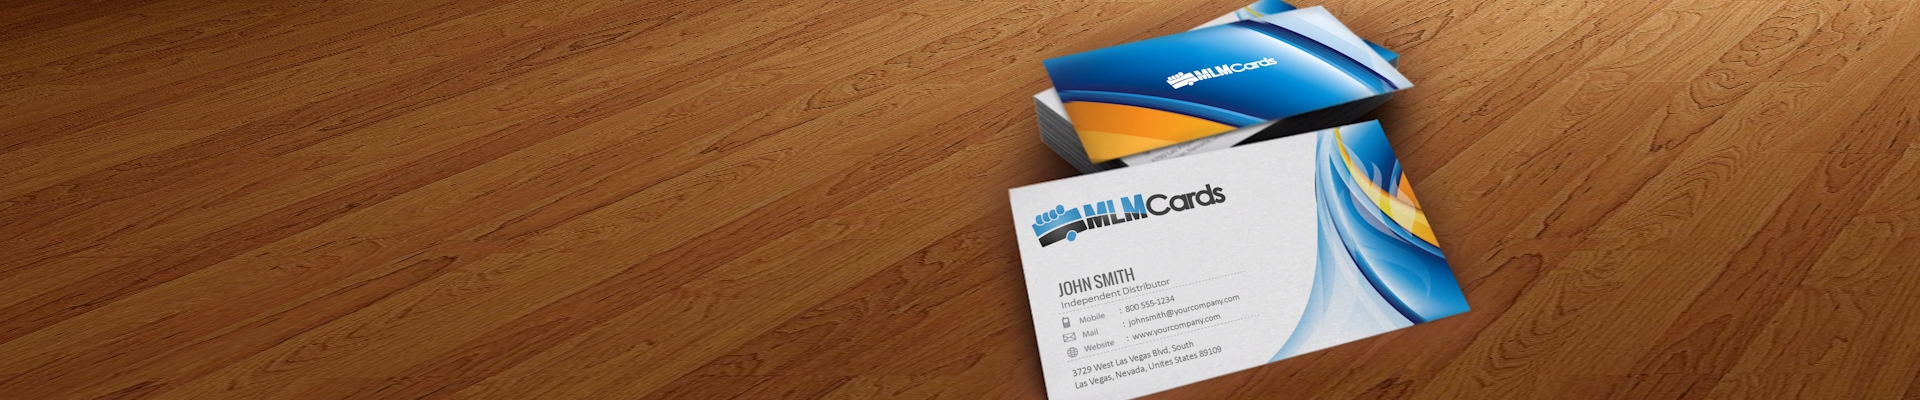 mlo business cards 1